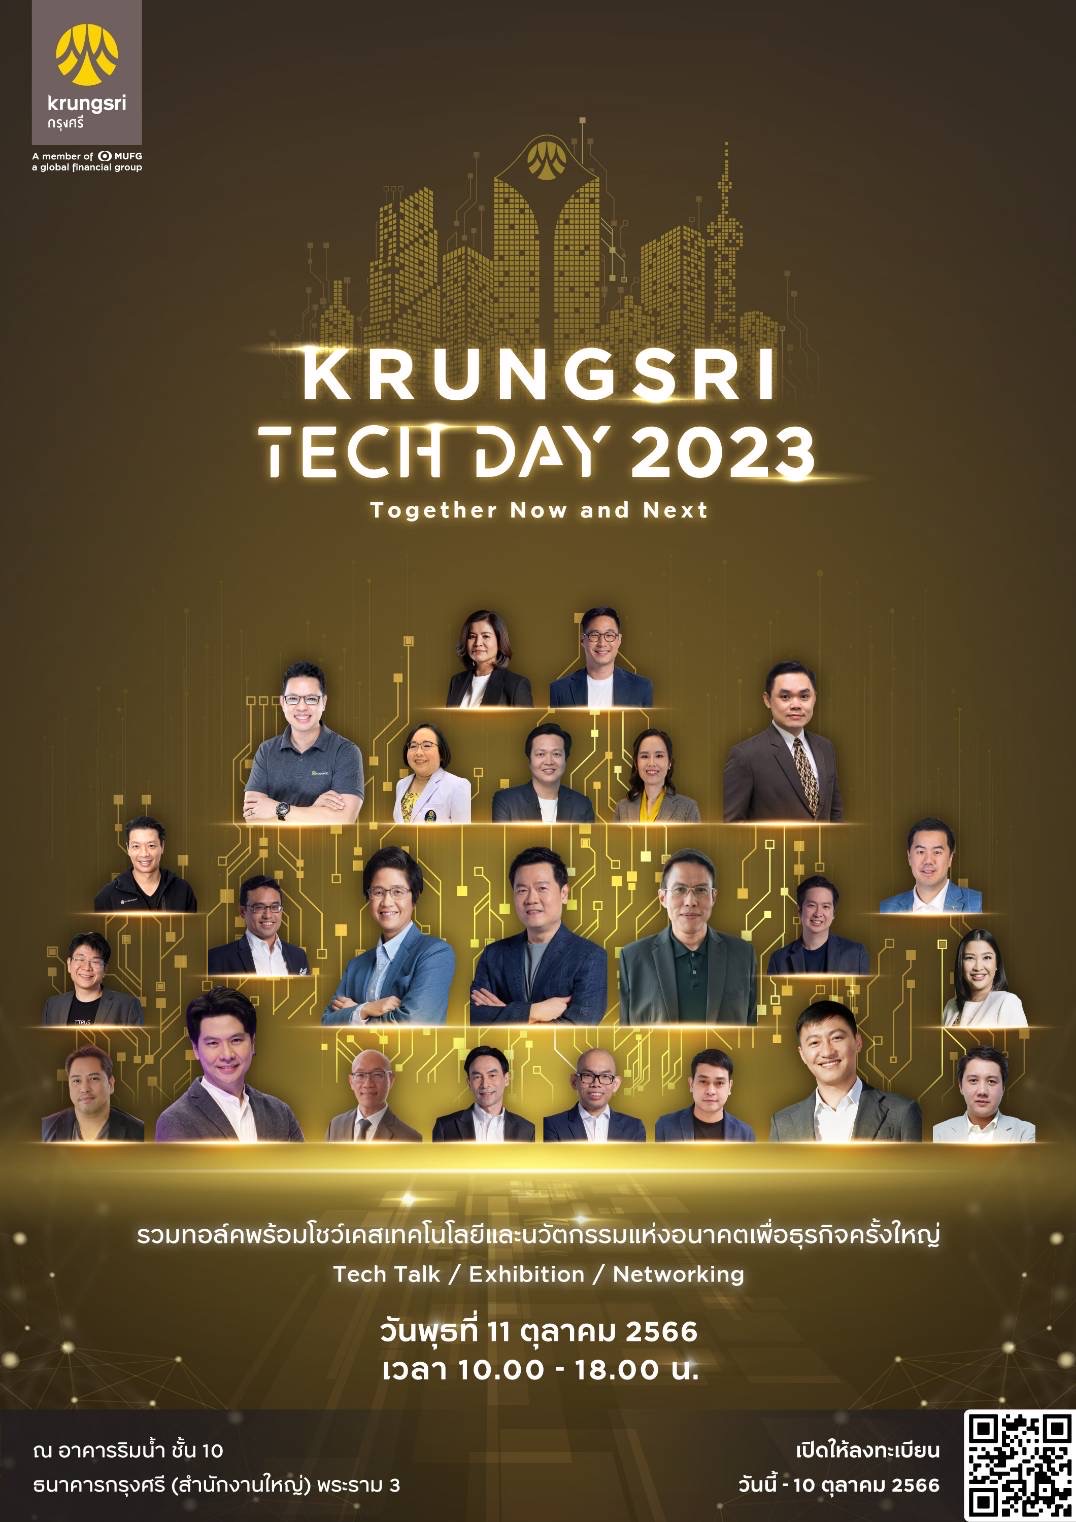 Krungsri Tech Day 2023: Together Now and Next The Collaborations between Krungsri and Tech Partners for Future Technology and Innovation